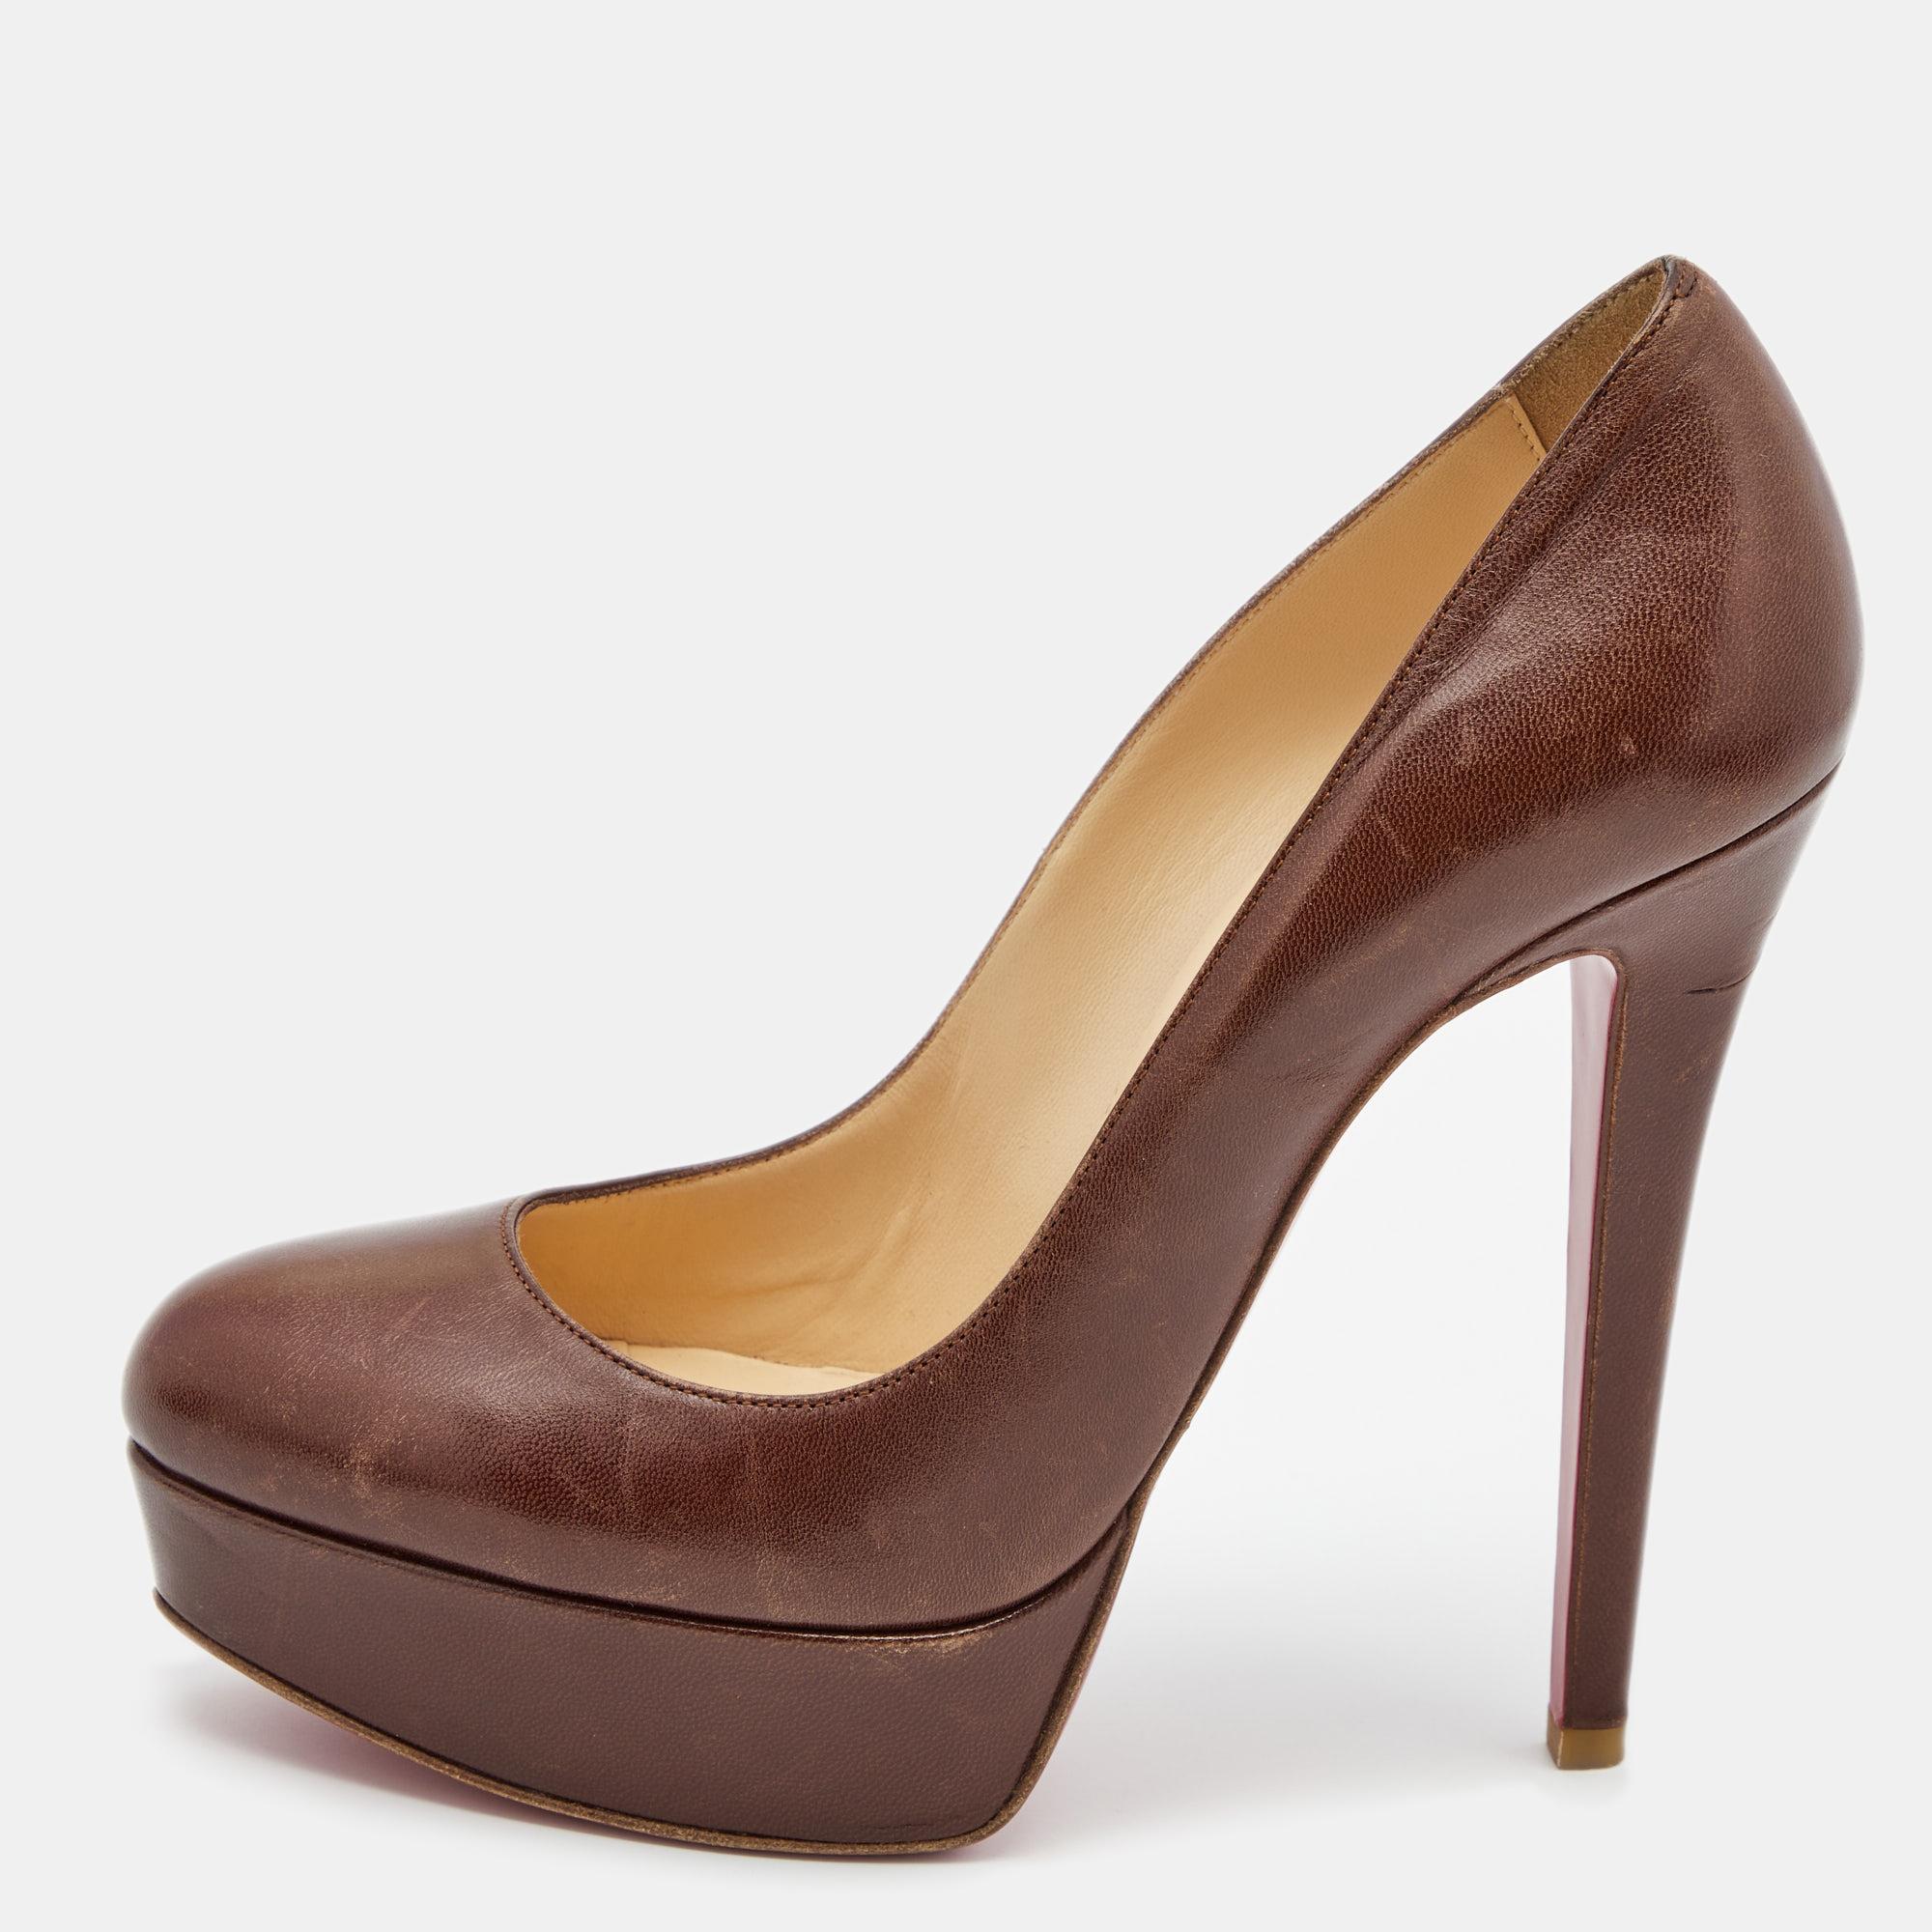 Embrace new styles and trends as you wear these Bianca pumps from the House of Christian Louboutin. They are made from brown leather on the exterior, granting them an exceptionally glamorous look. These pumps show platforms, rounded toes, and pointy